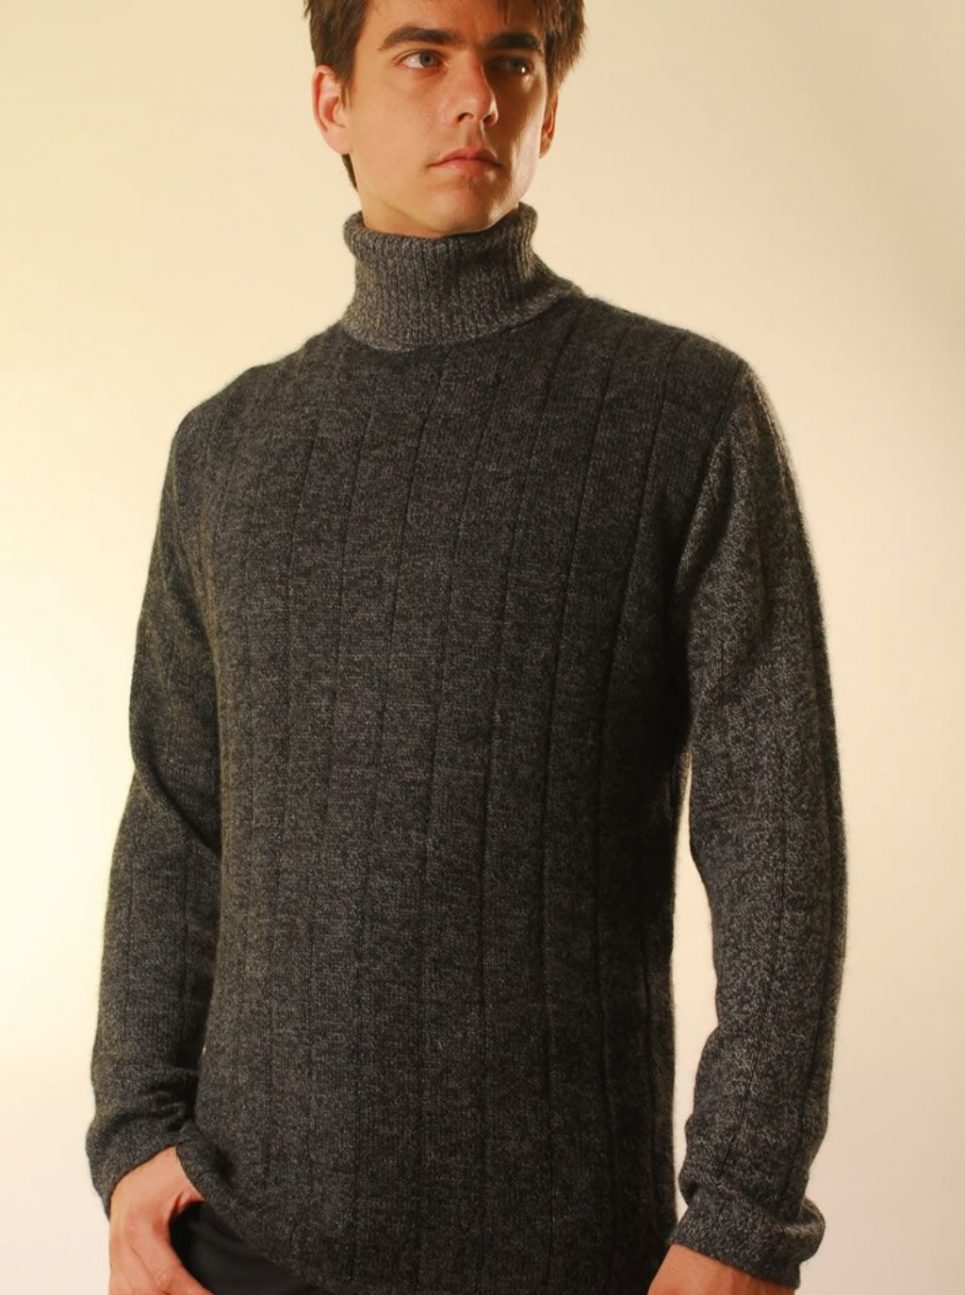 Alpaca Sweater for Men with a Turtle Neck